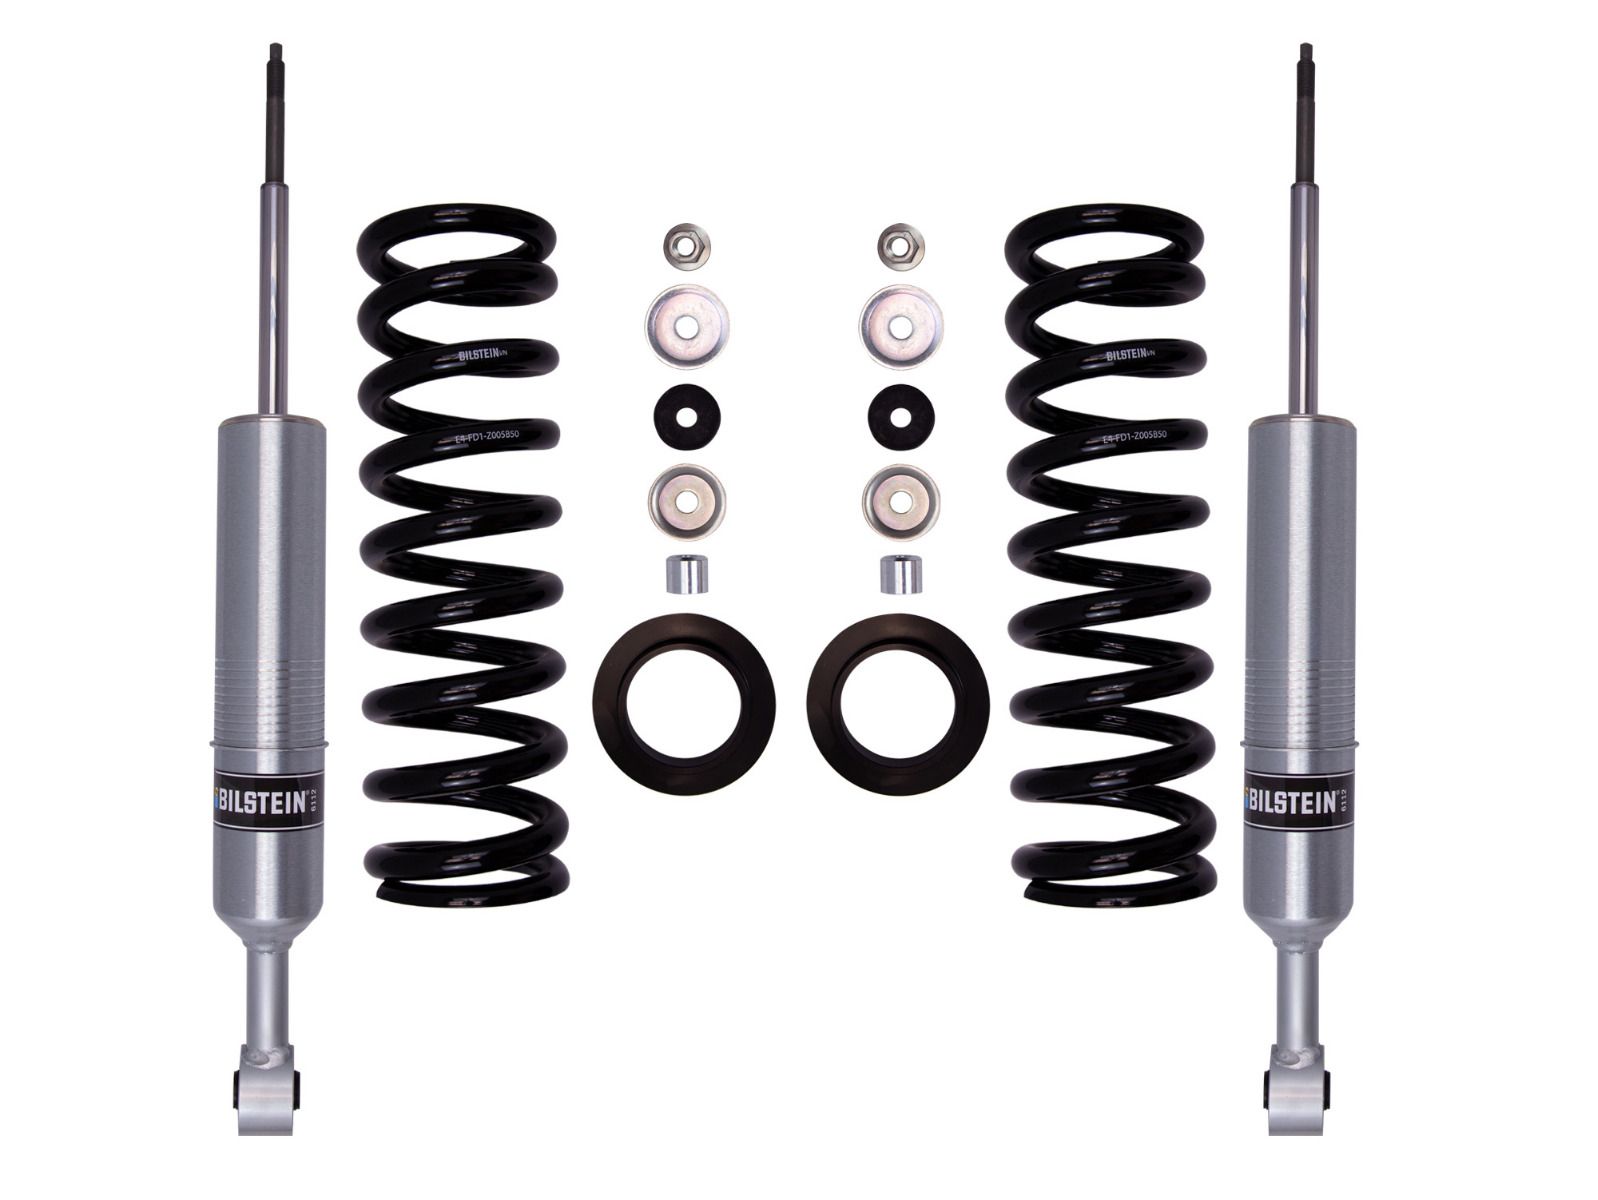 FJ Cruiser 2007-2009 Toyota 4wd - Bilstein FRONT 6112 Series Coil-Over Kit (Adjustable Height 1.9"-3.4" Front Lift)